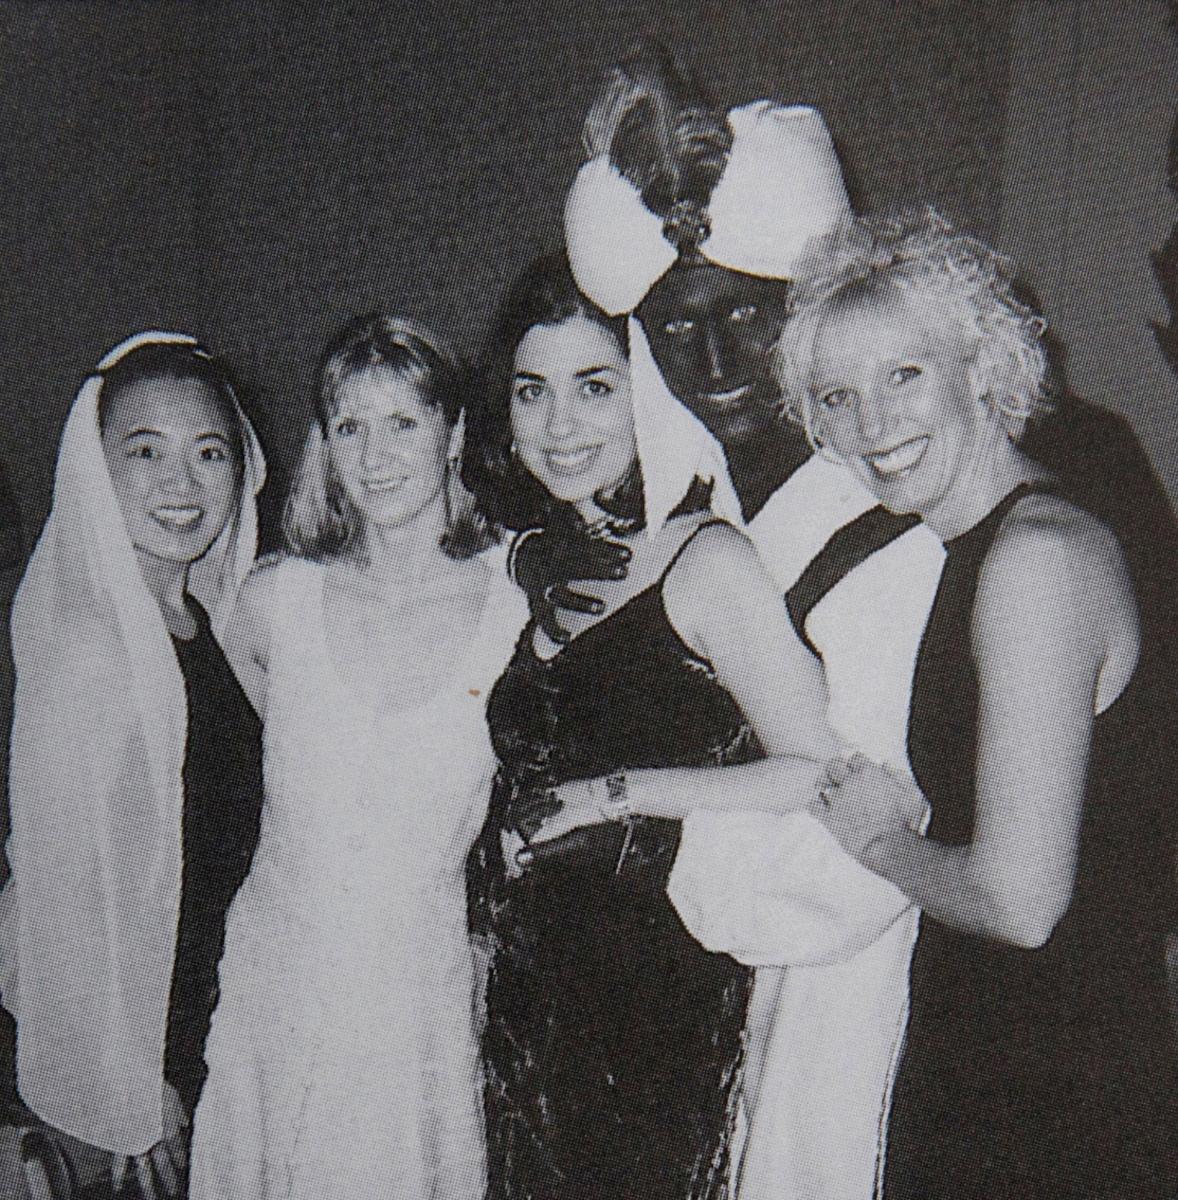 Canada’s Prime Minister Justin Trudeau, with his face and hands painted brown, poses with others during an "Arabian Nights" party when he was a 29-year-old teacher at the West Point Grey Academy in Vancouver, Canada, in this photo published in the academy’s 2000-2001 yearbook. This image, published in The View yearbook, was obtained by Time. (Reuters)